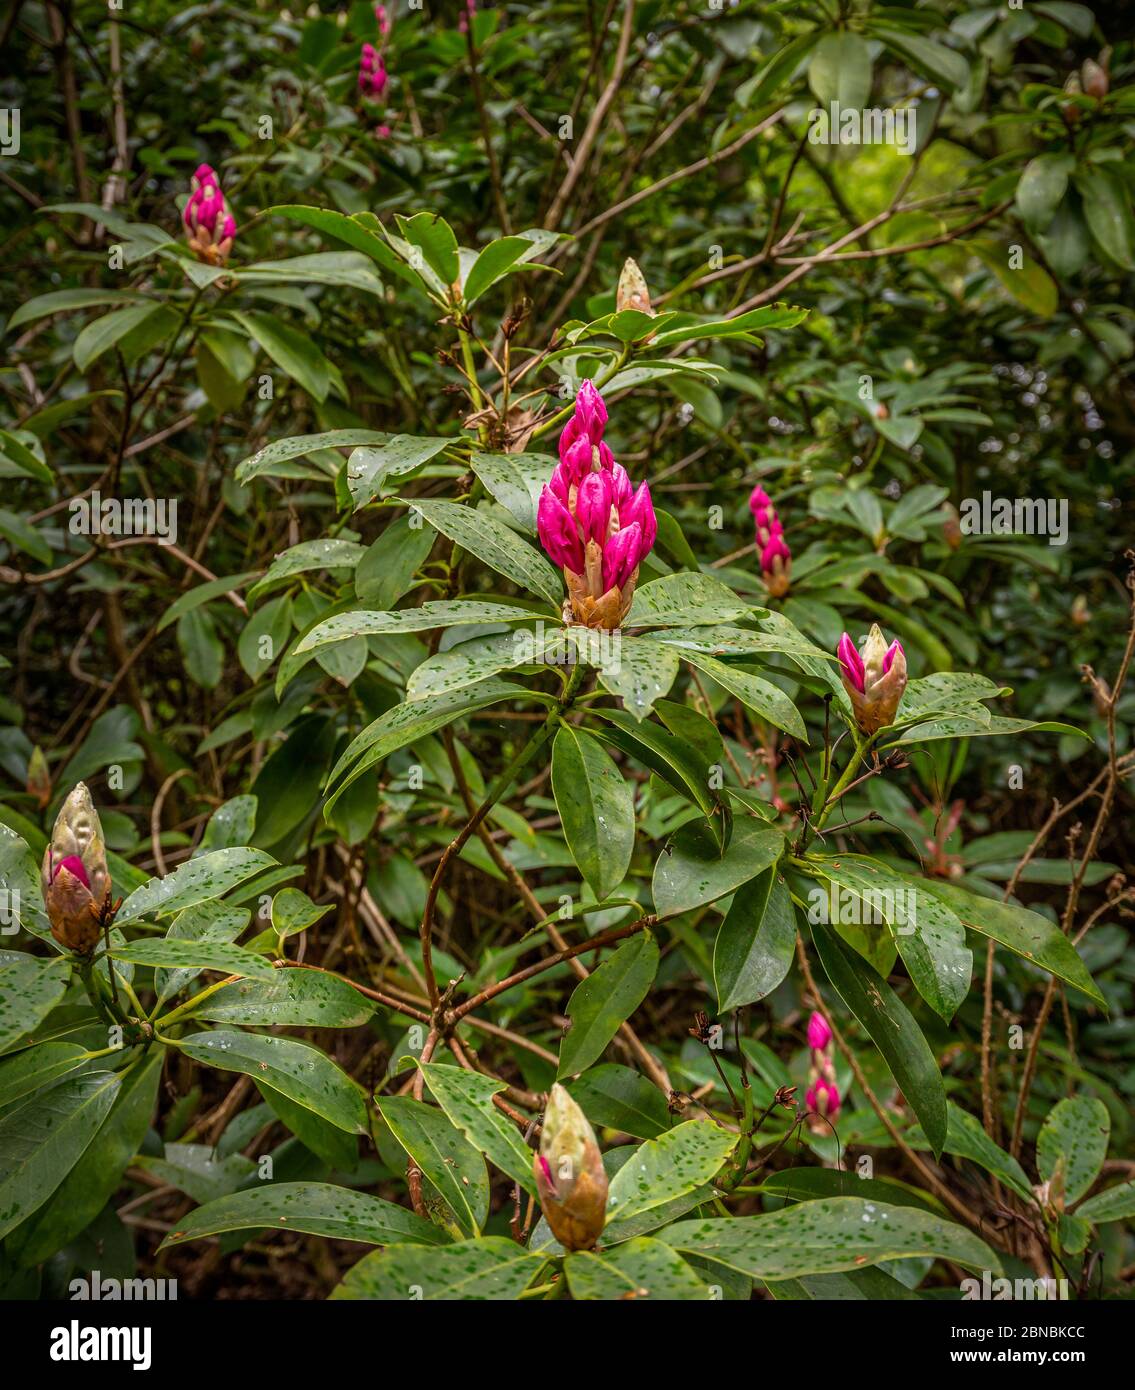 Flower bud on a nest of leaves getting ready to unfurl.  A rhododendron shrub set in a woodland with raindrops visible on the leaves. Stock Photo